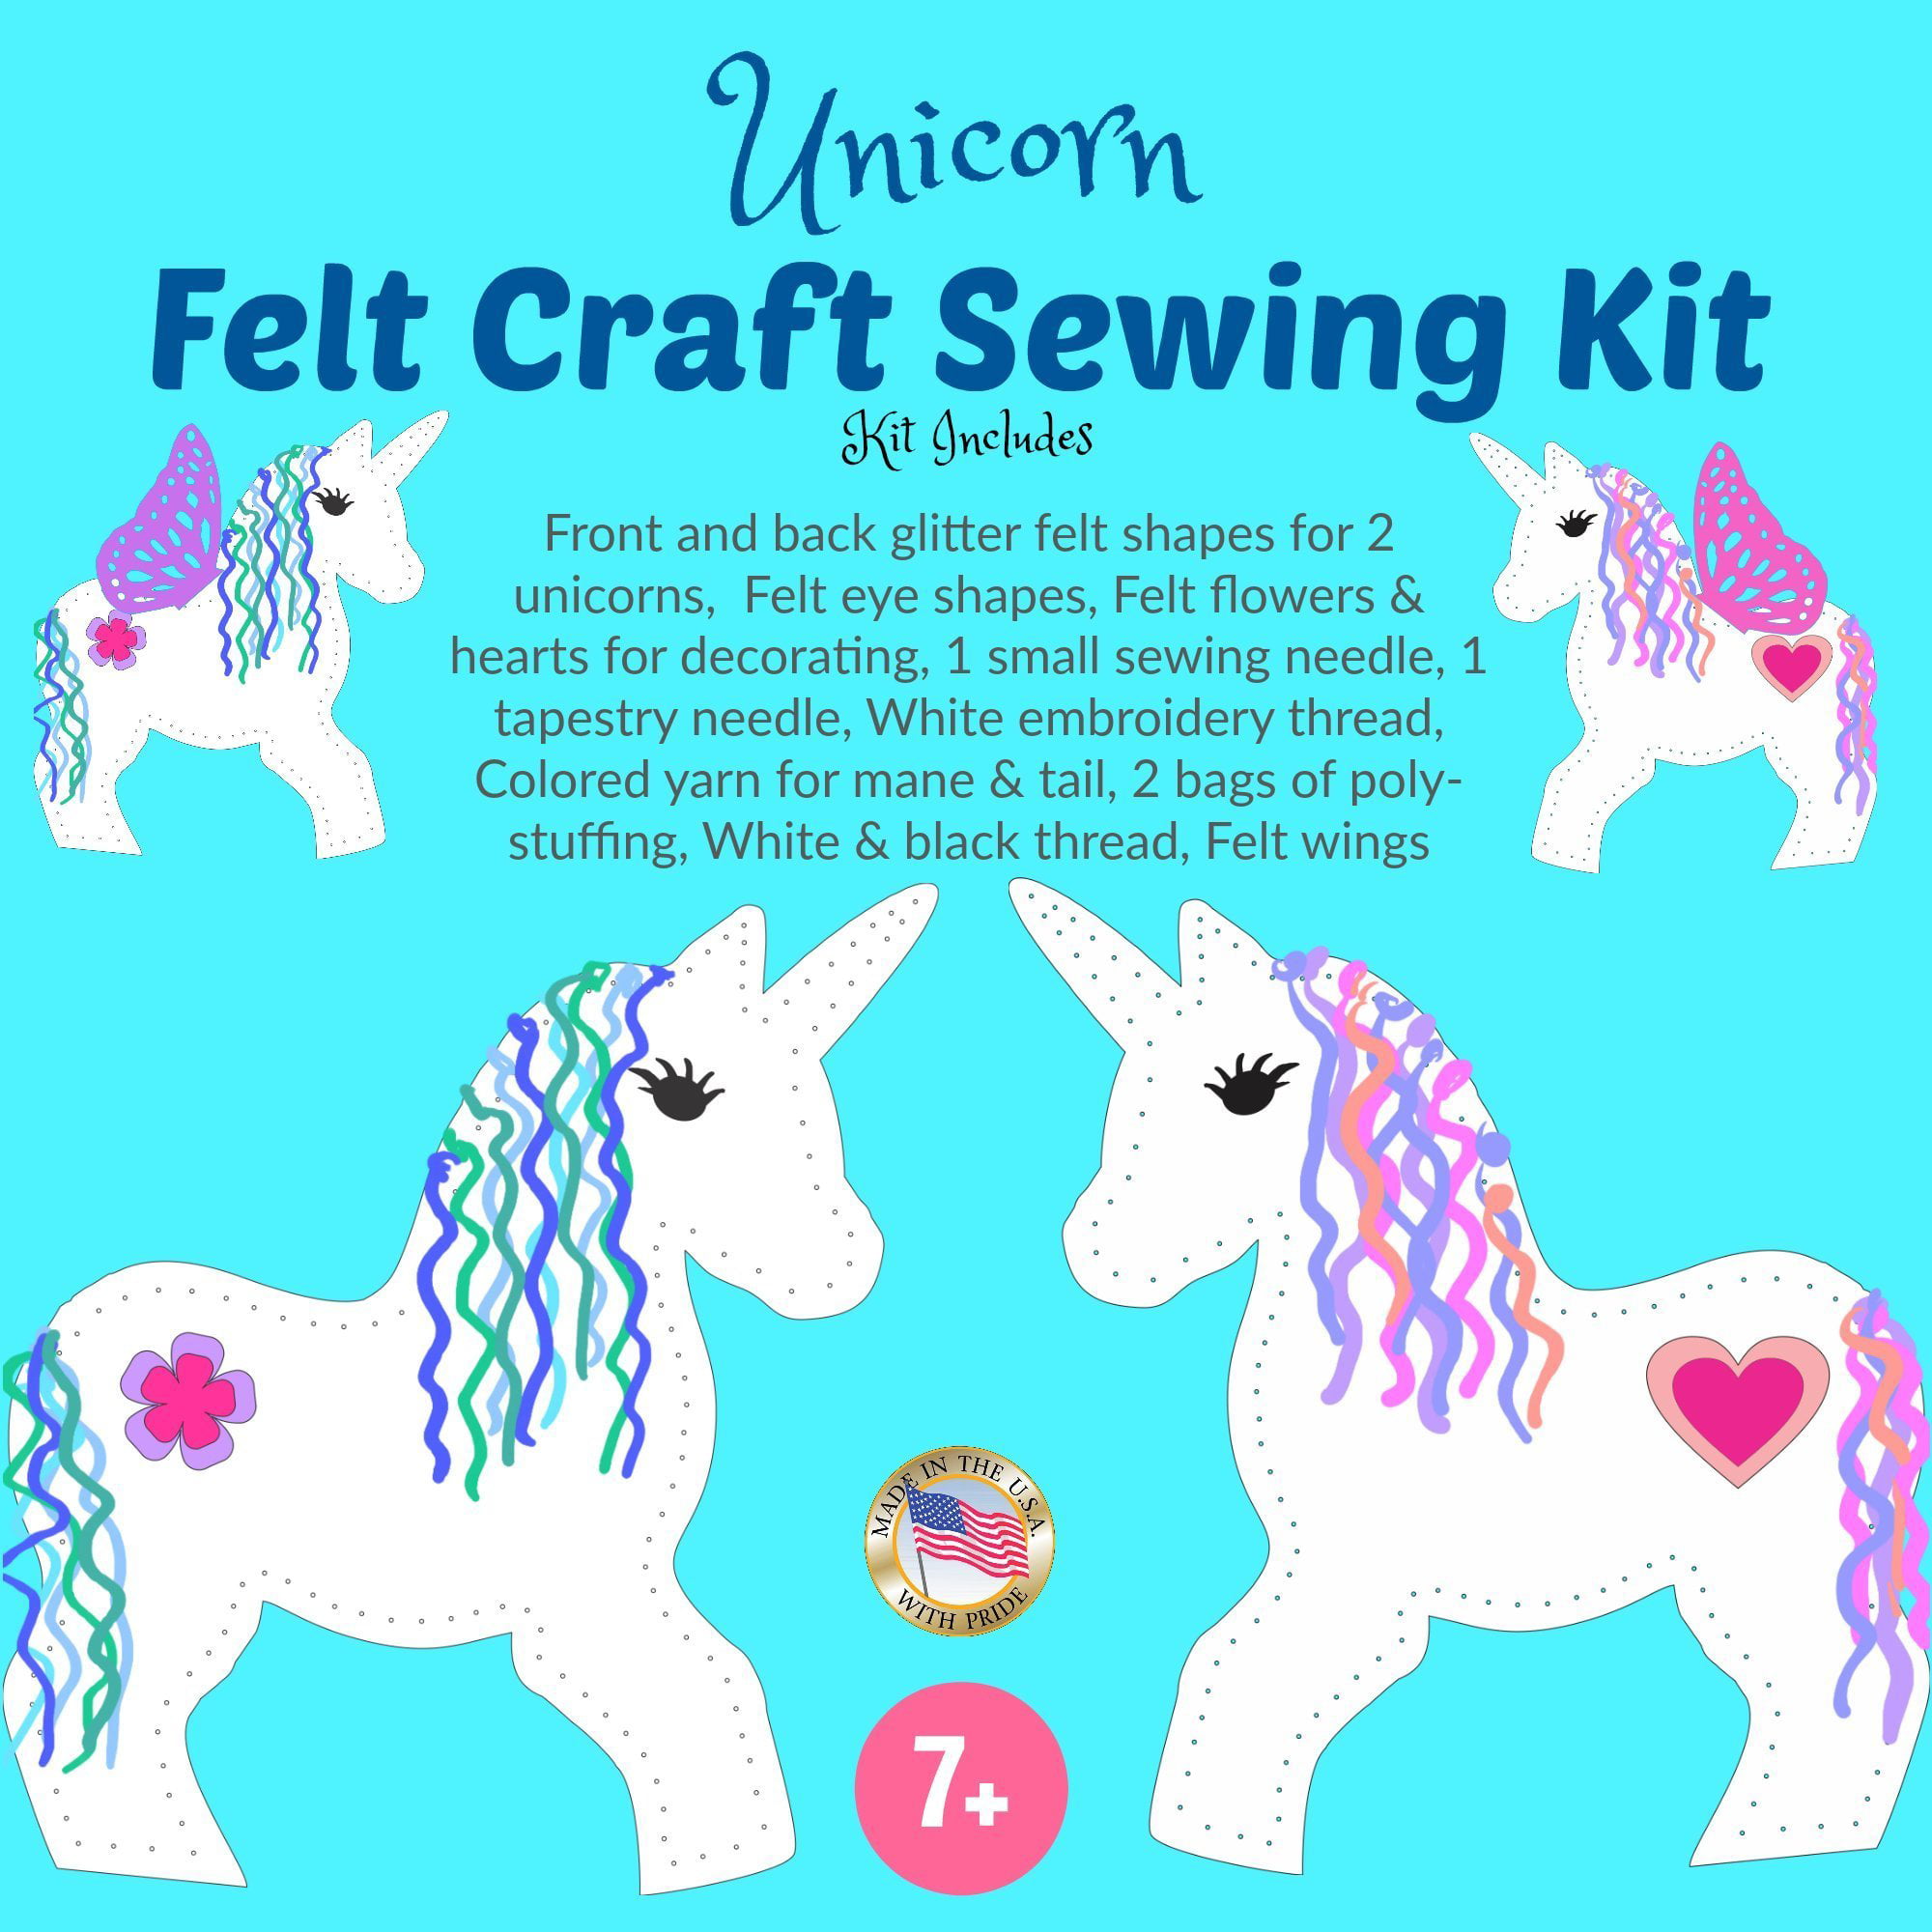  Sew Mini Unicorn Plushies Craft Kit for Kids – Sew and Stuff 5  Unicorn Themed Mini Plushies for Girls, Sewing Craft for Beginners, Learn  to Sew Arts and Crafts Set, Pre-Cut